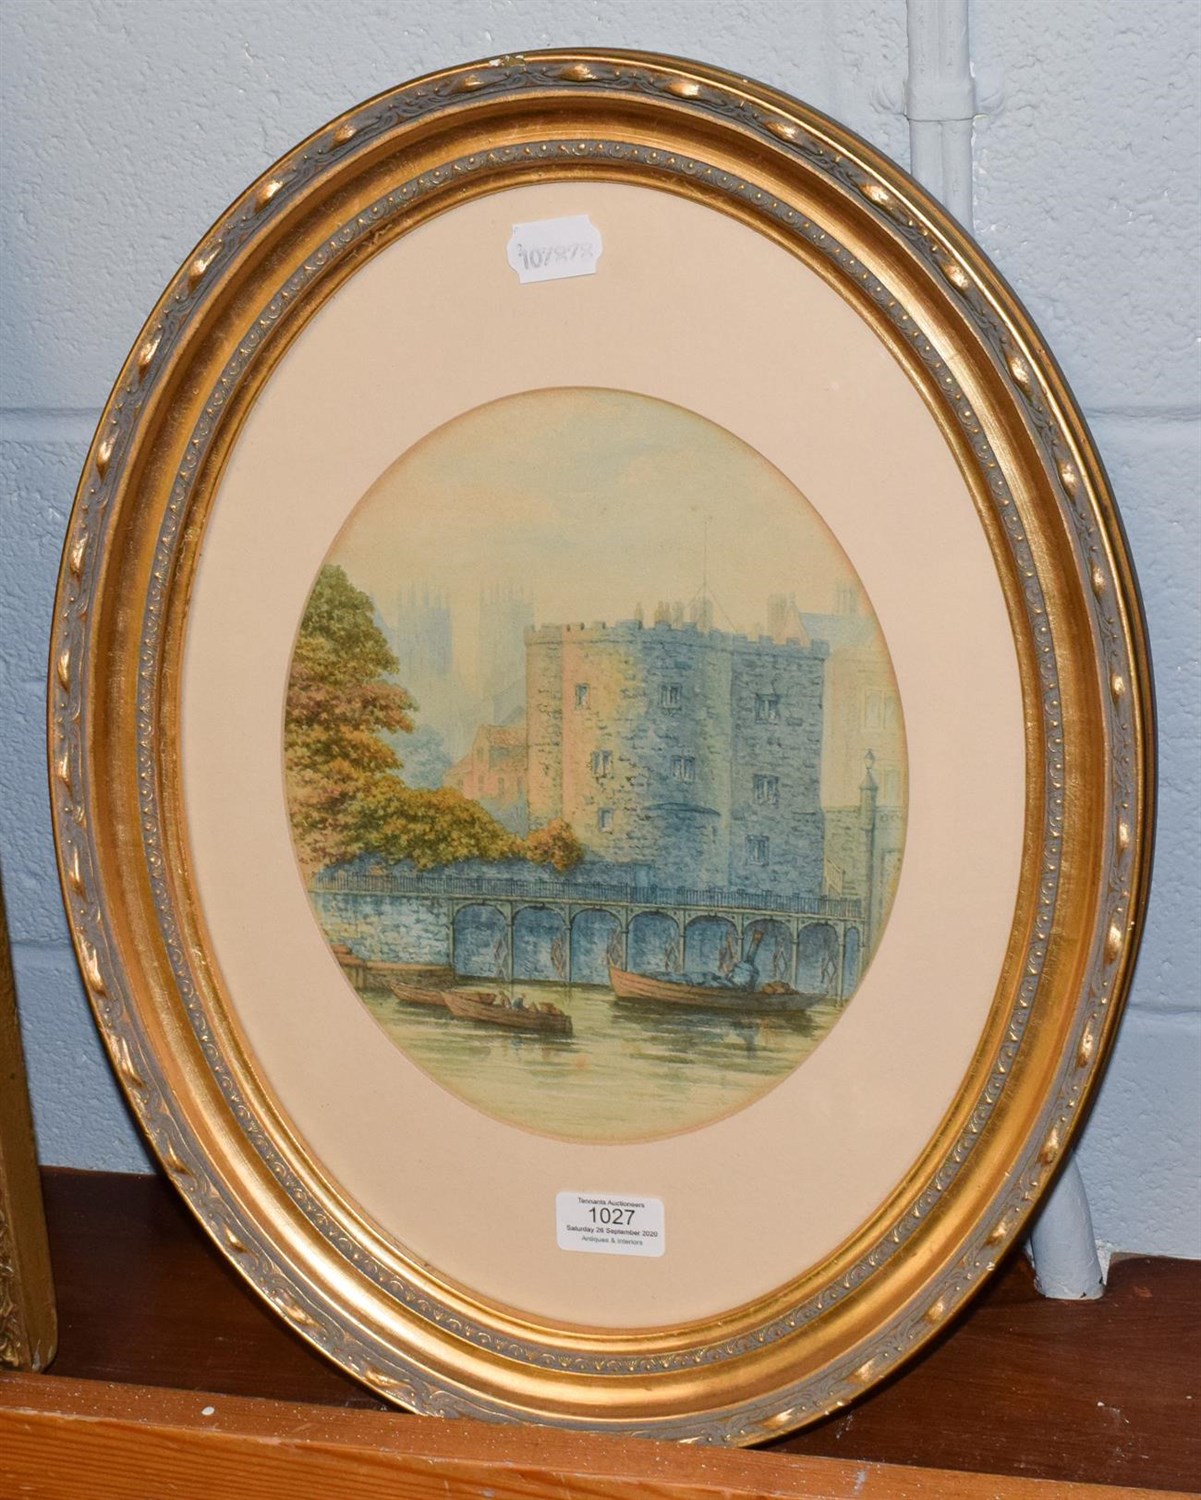 Lot 1027 - Attributed to George Fall, Kendal water tower, watercolour, 21cm diameter (oval)